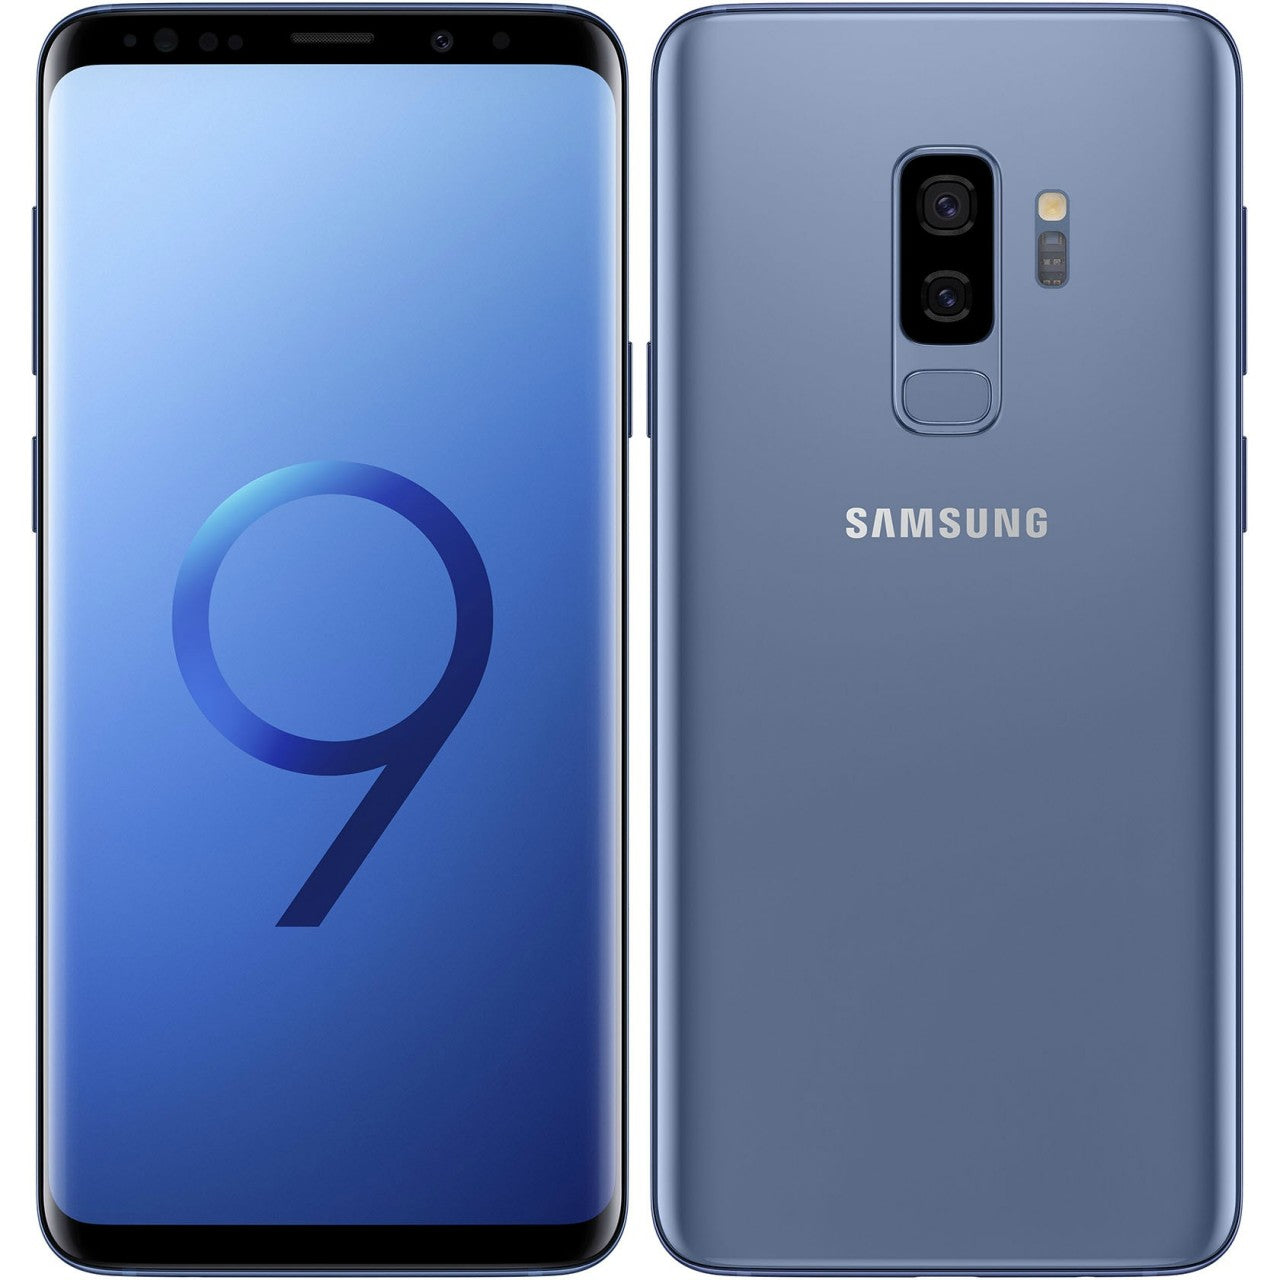 Samsung Galaxy S9 64GB T-Mobile/Unlocked - Coral Blue